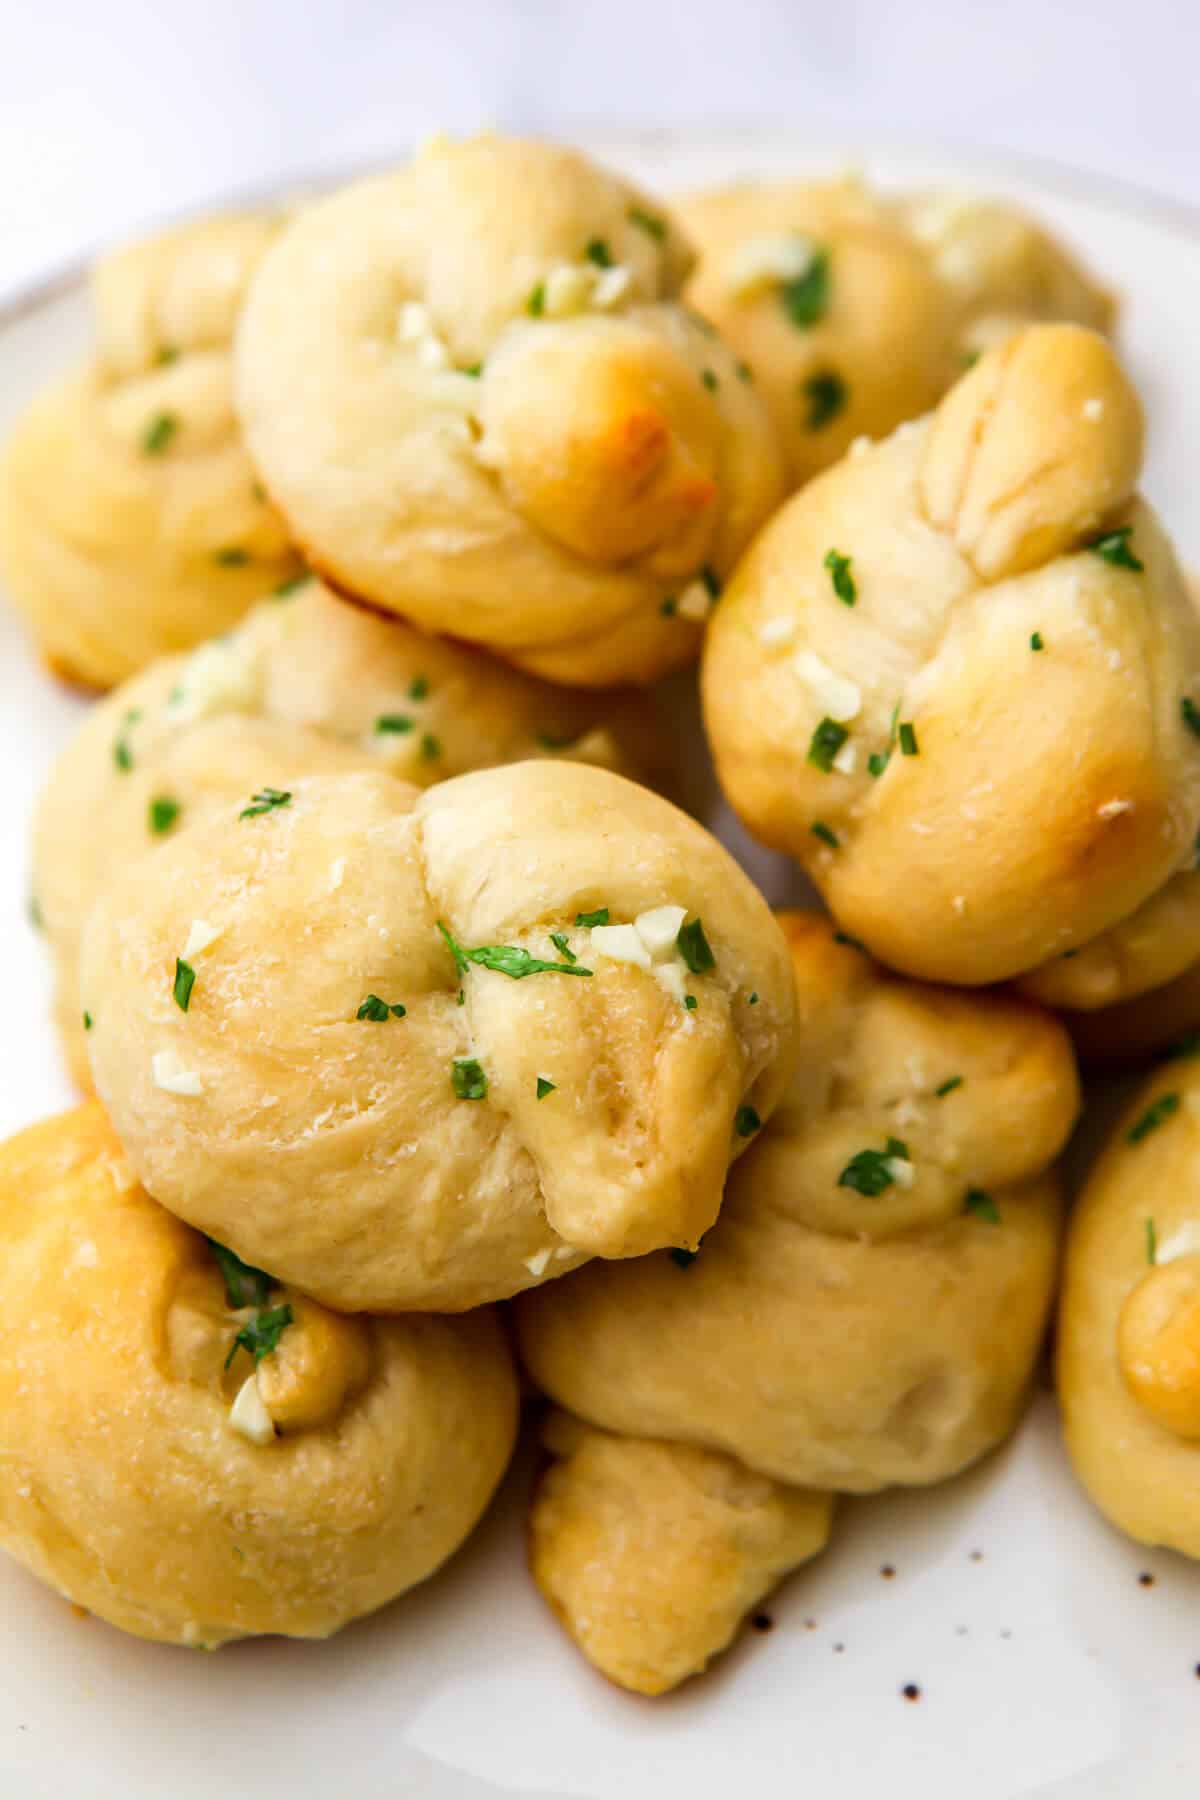 A pile of vegan garlic knots on a white plate.